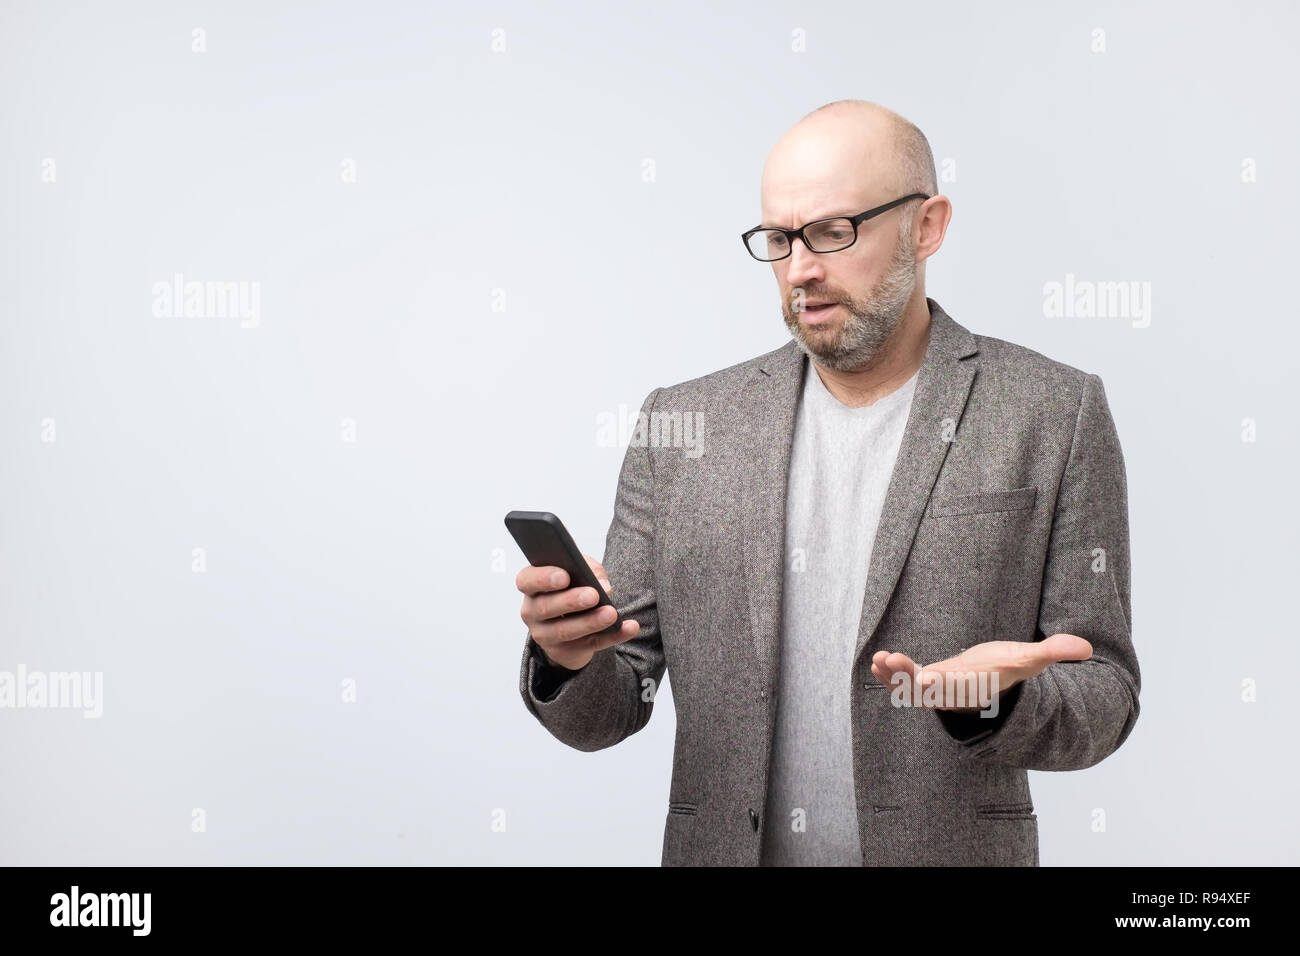 Puzzled bald man reading sms with emotional face expression Stock Photo